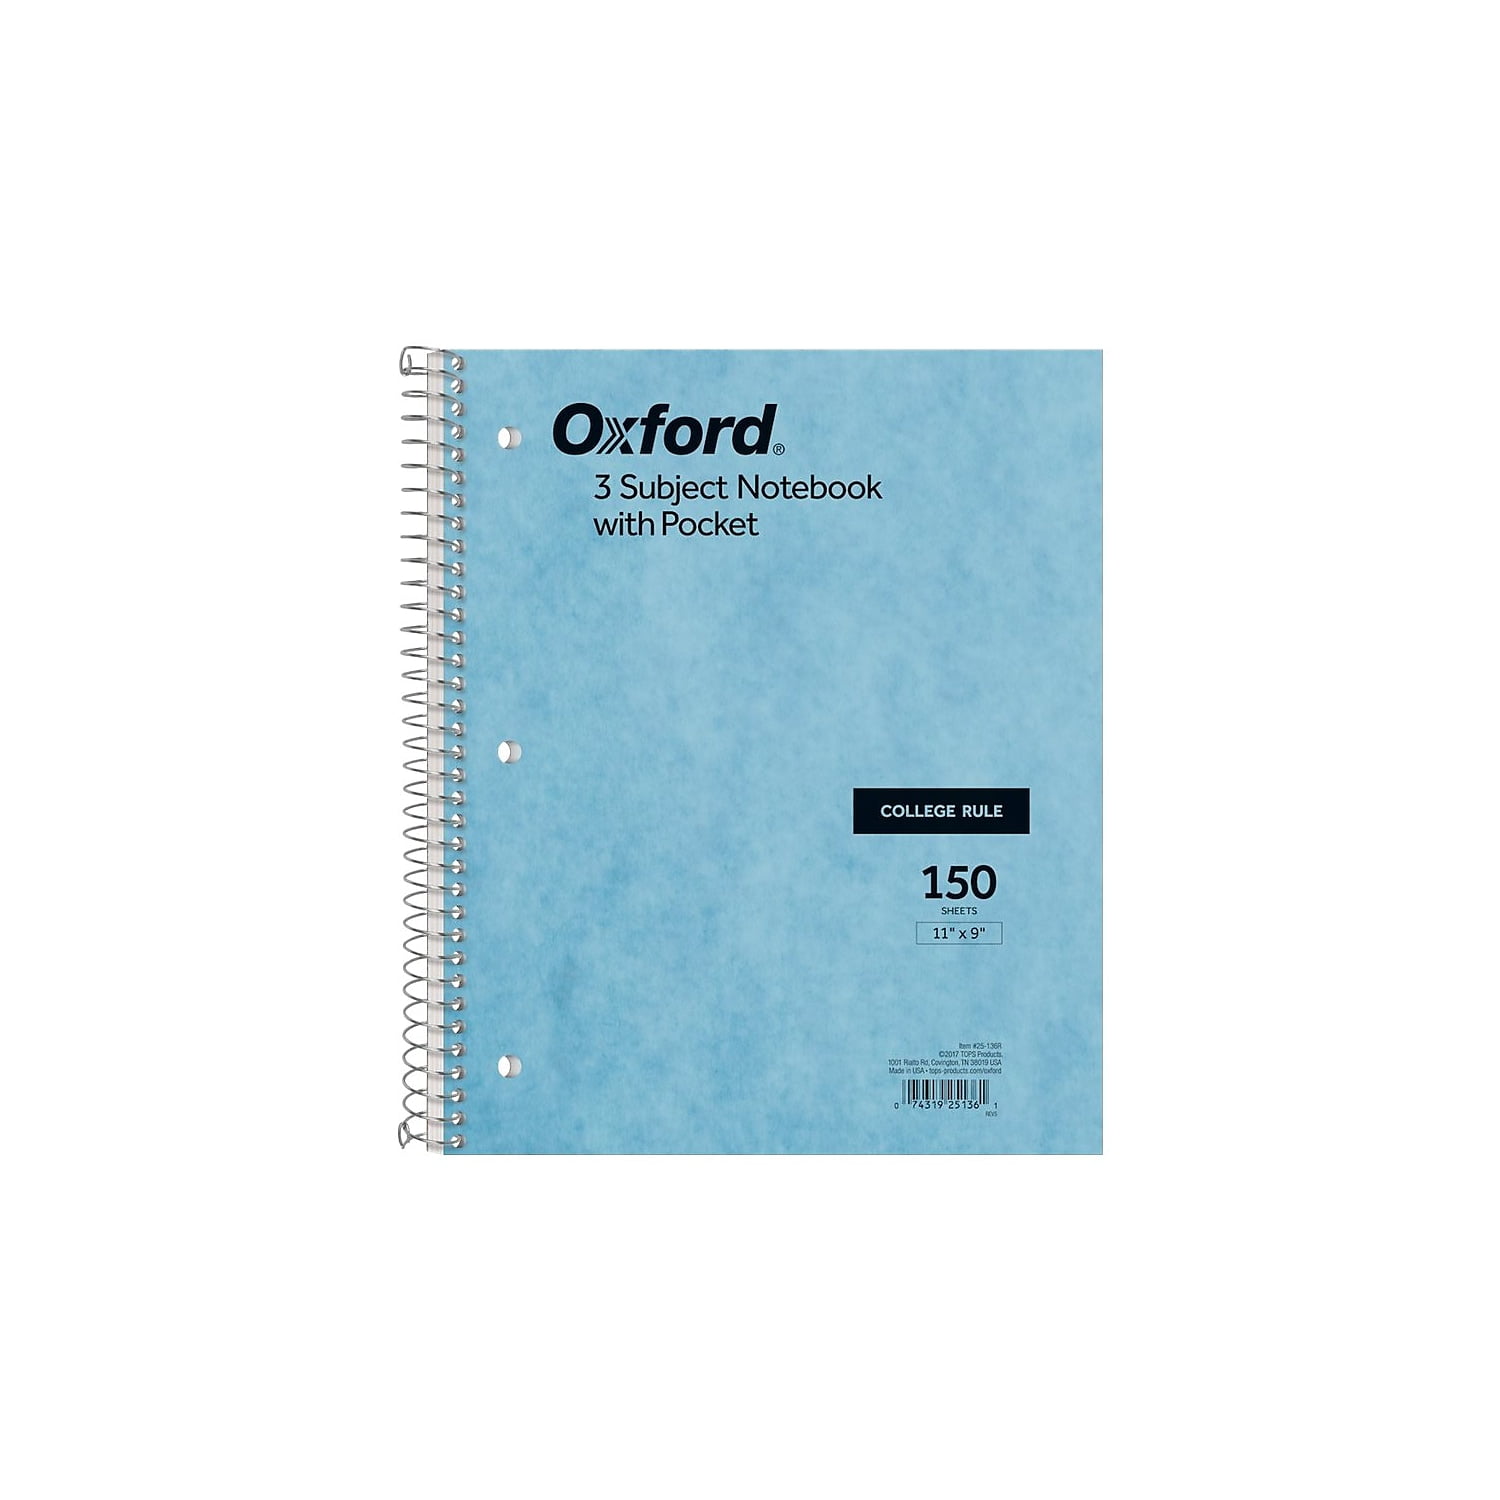 Durable Plastic Cover 2 Pack 150 Sheets - New 3-Subject College Ruled Paper Oxford Spiral Notebooks 3 Divider Pockets 10386 